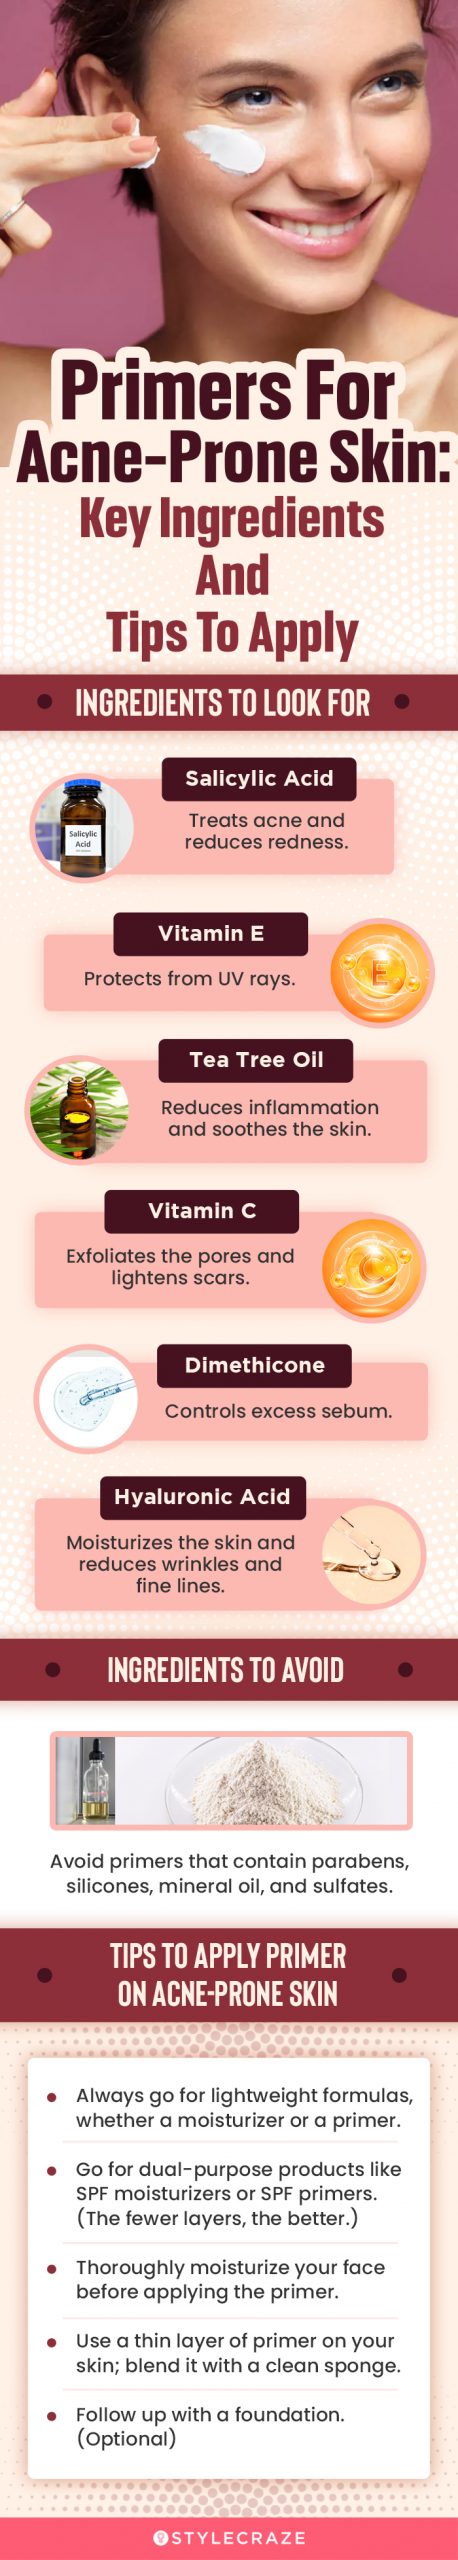 Primers For Acne–Prone Skin: Key Ingredients And How To Apply [infographic]